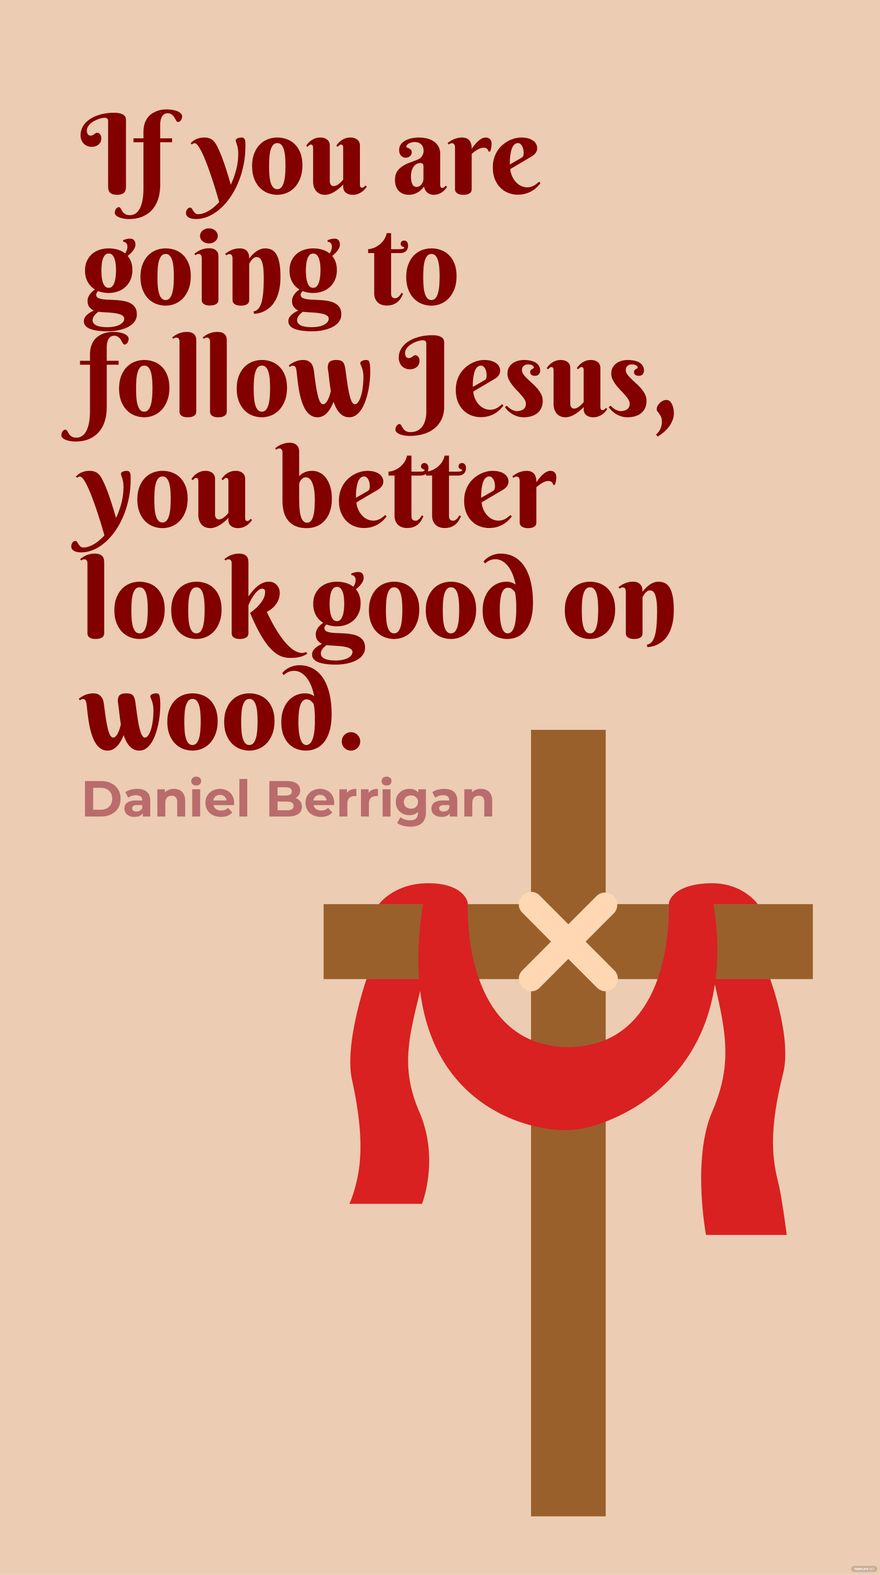 Free Daniel Berrigan - If you are going to follow Jesus, you better look good on wood. in JPG